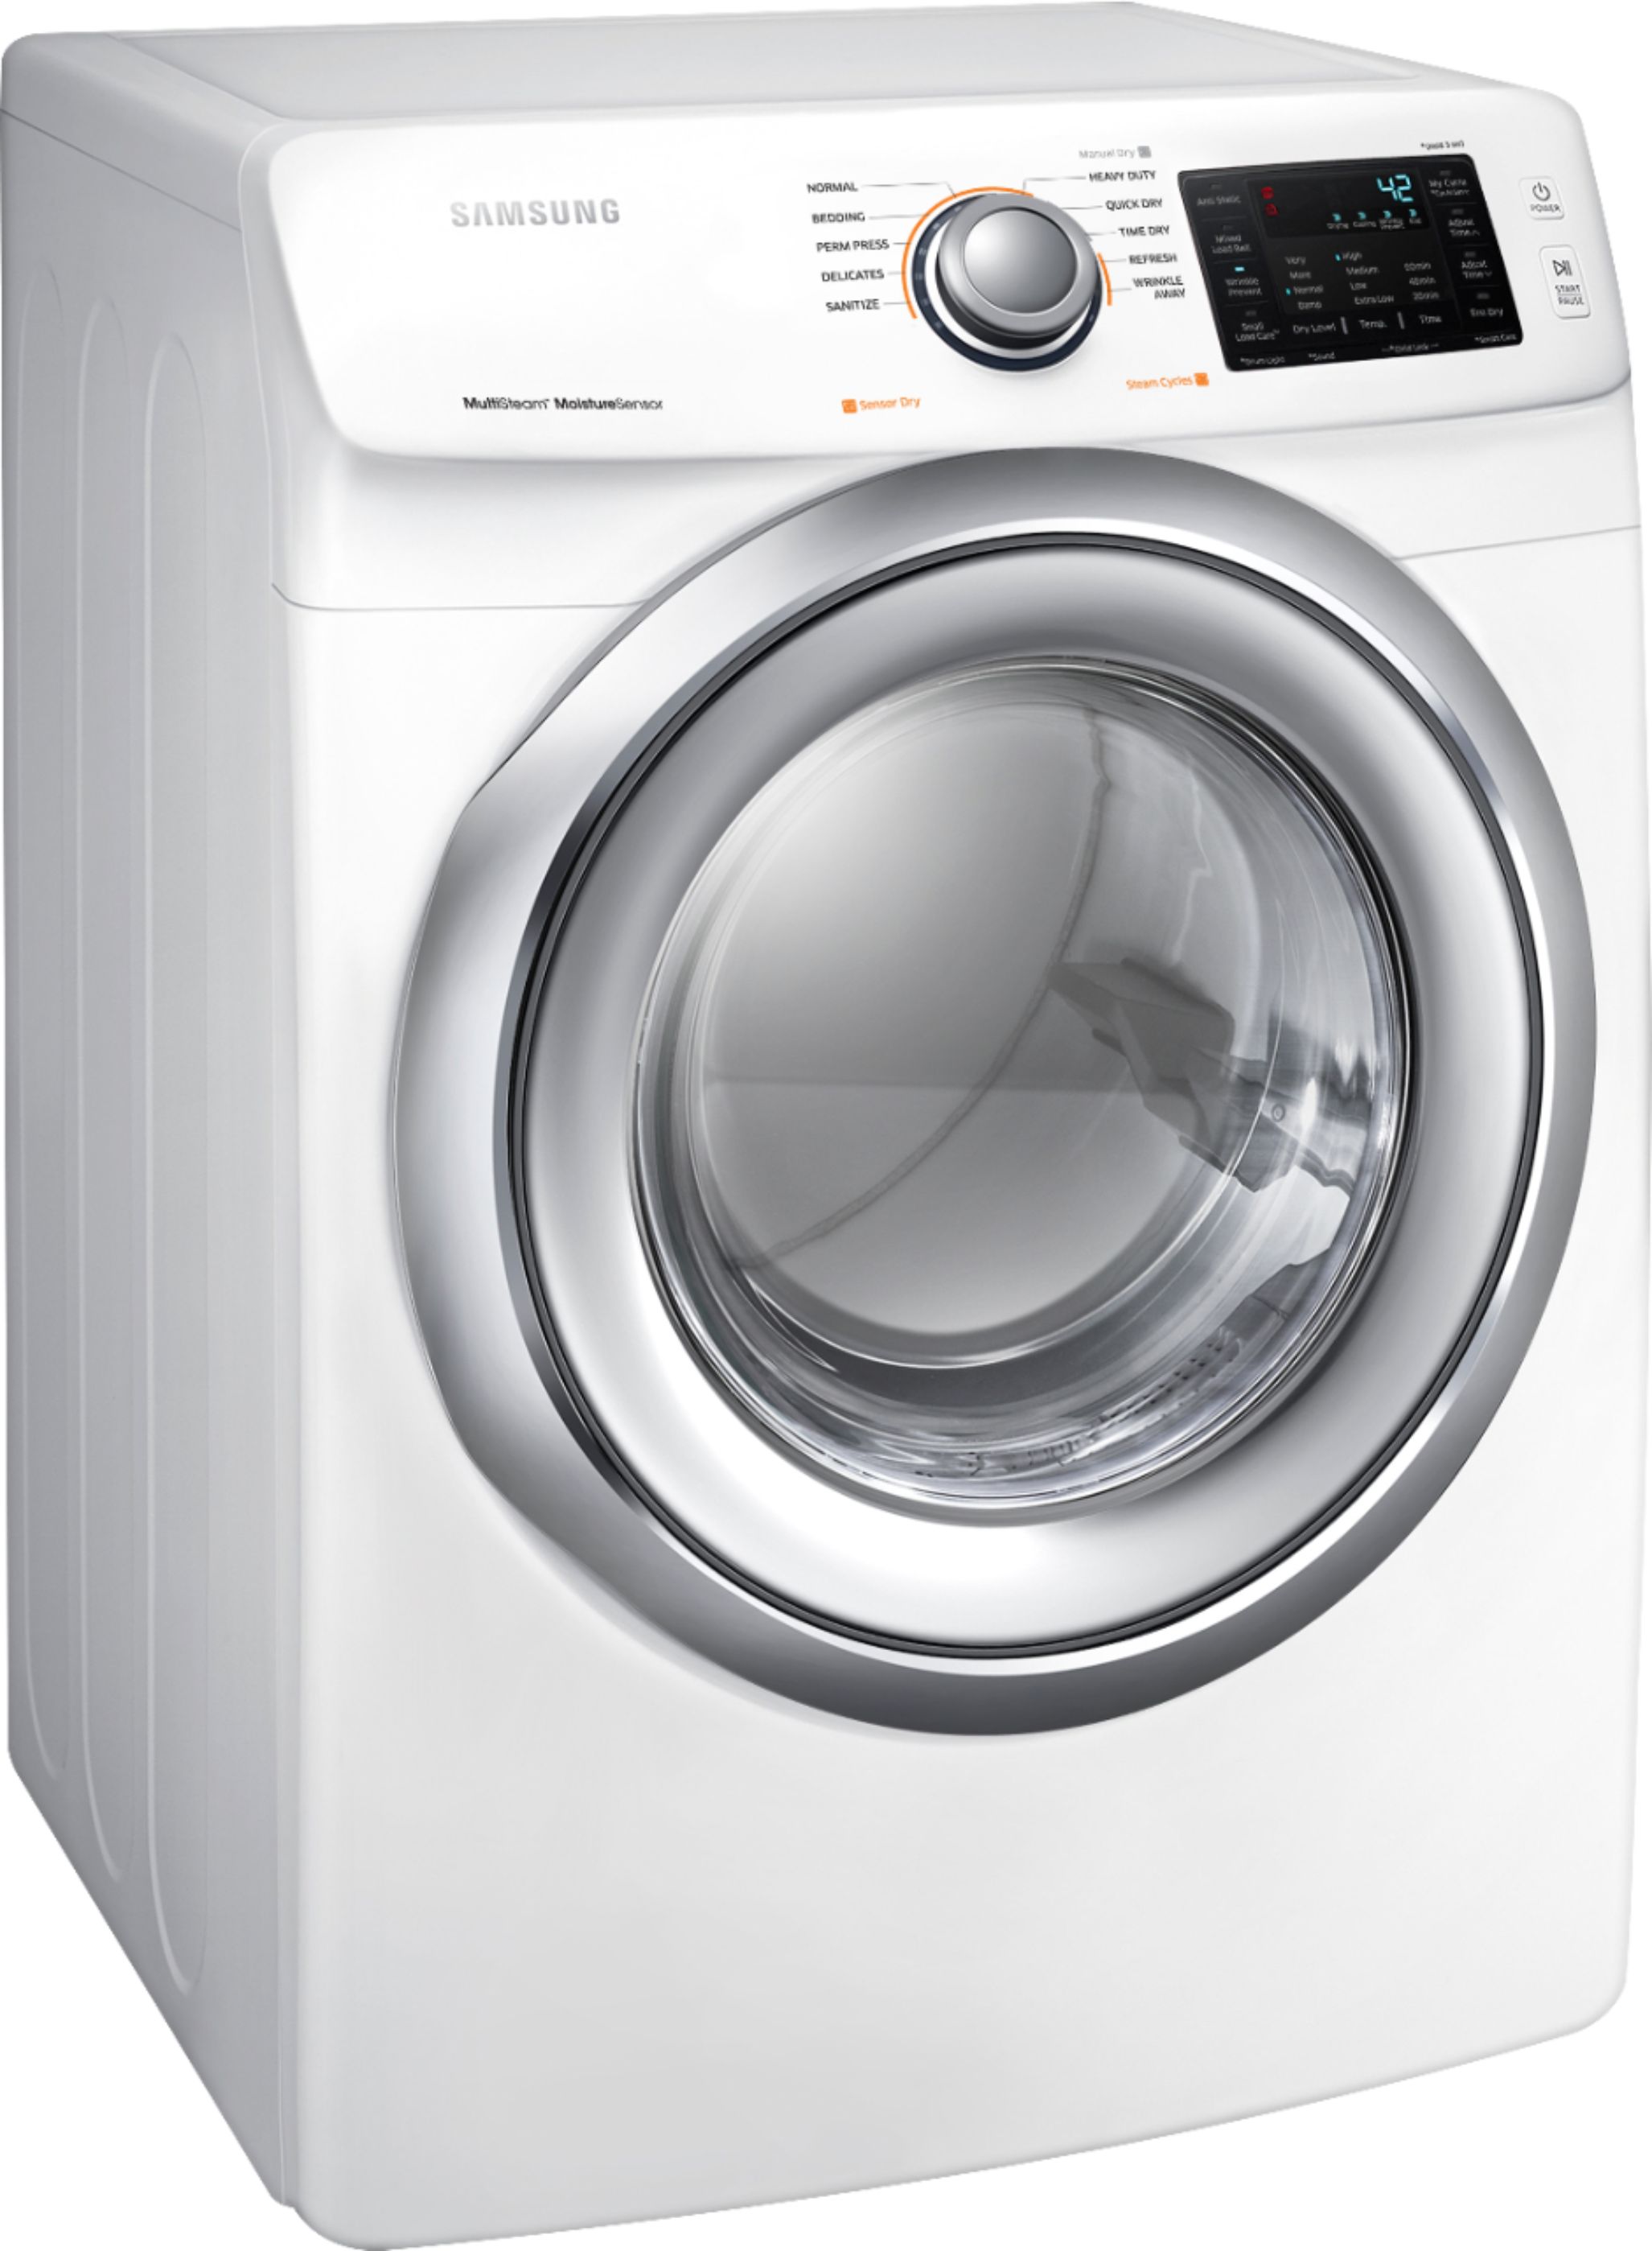 Samsung 7.5 Cu. Ft. 10Cycle Gas Dryer with Steam White DVG45N5300W